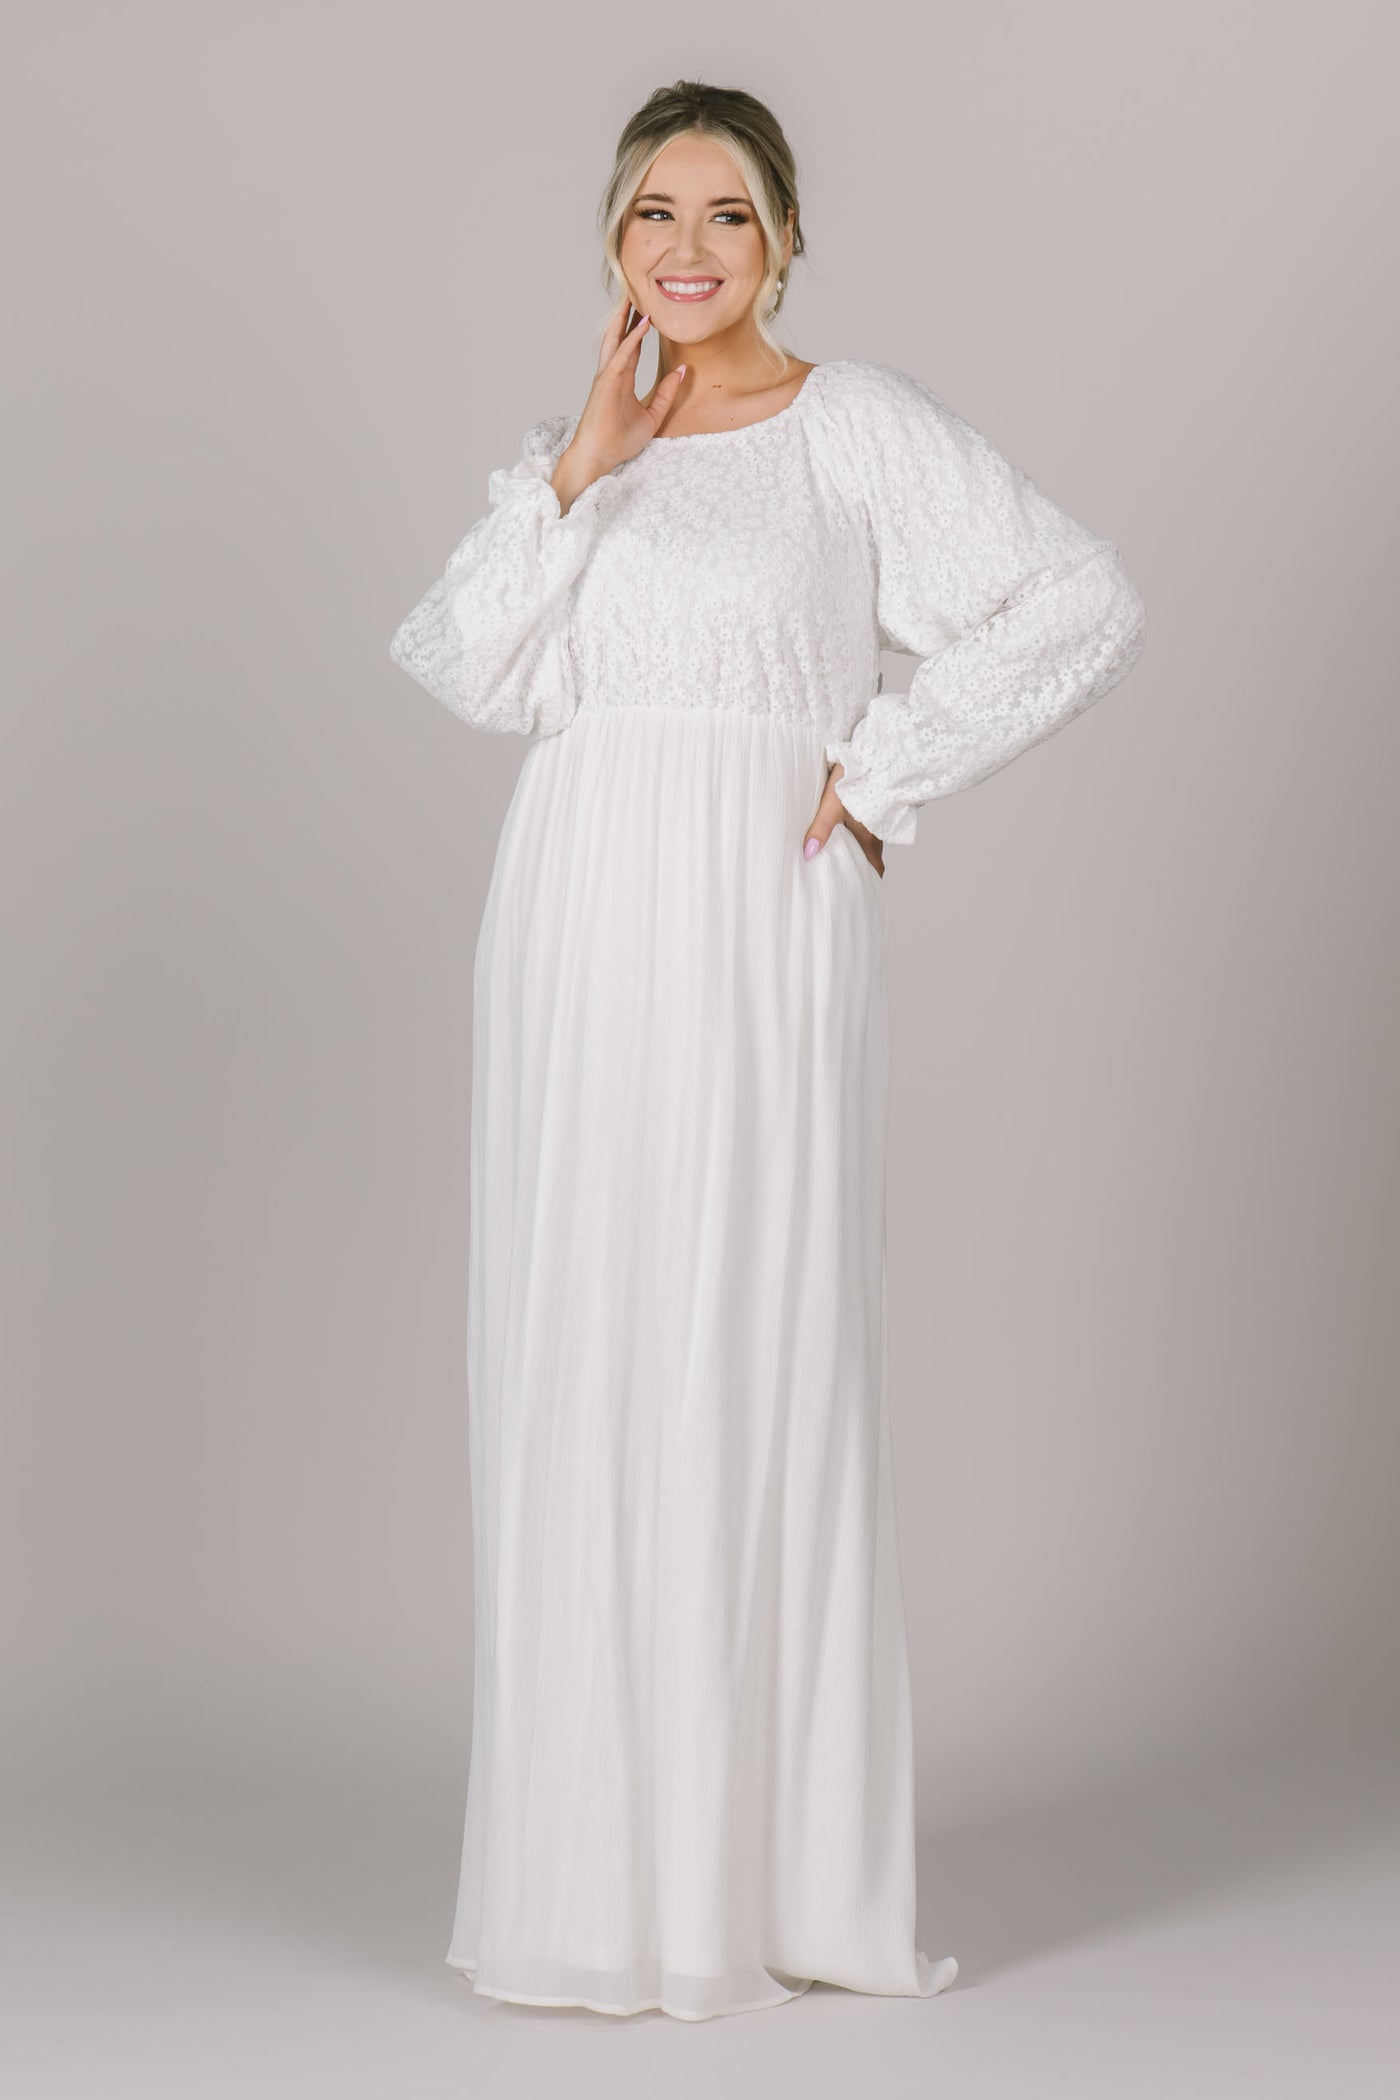 An LDS modest temple dress with a cinched waistband, bishop sleeves with a cinched cuff, and scoop neckline. The bodice is made of a stunning floral lace.